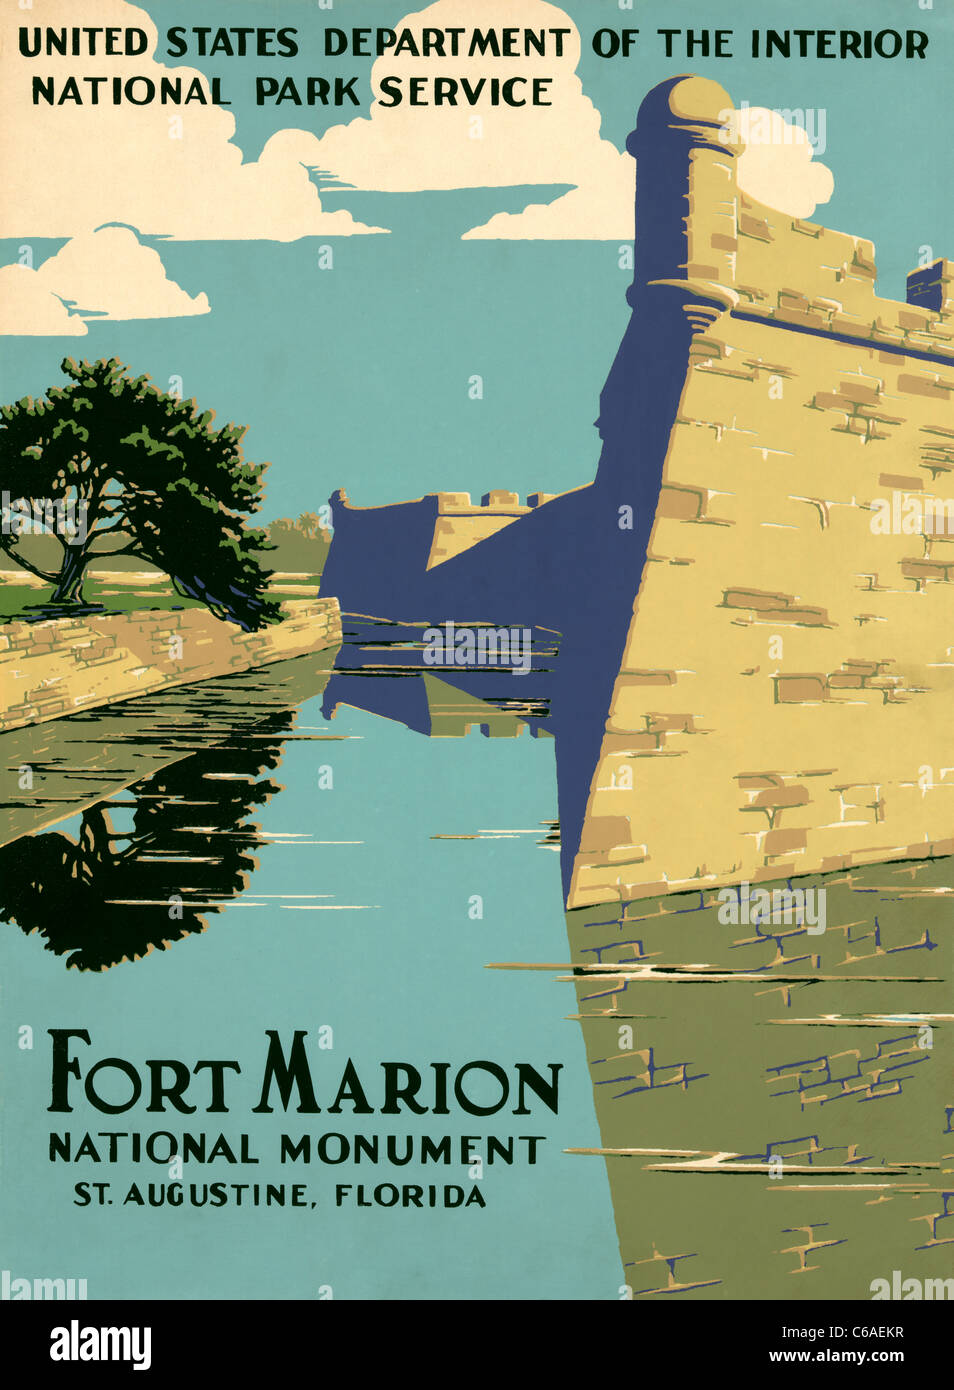 Fort Marion National Monument, St. Augustine, Florida 1938 National Park Service Poster Stock Photo